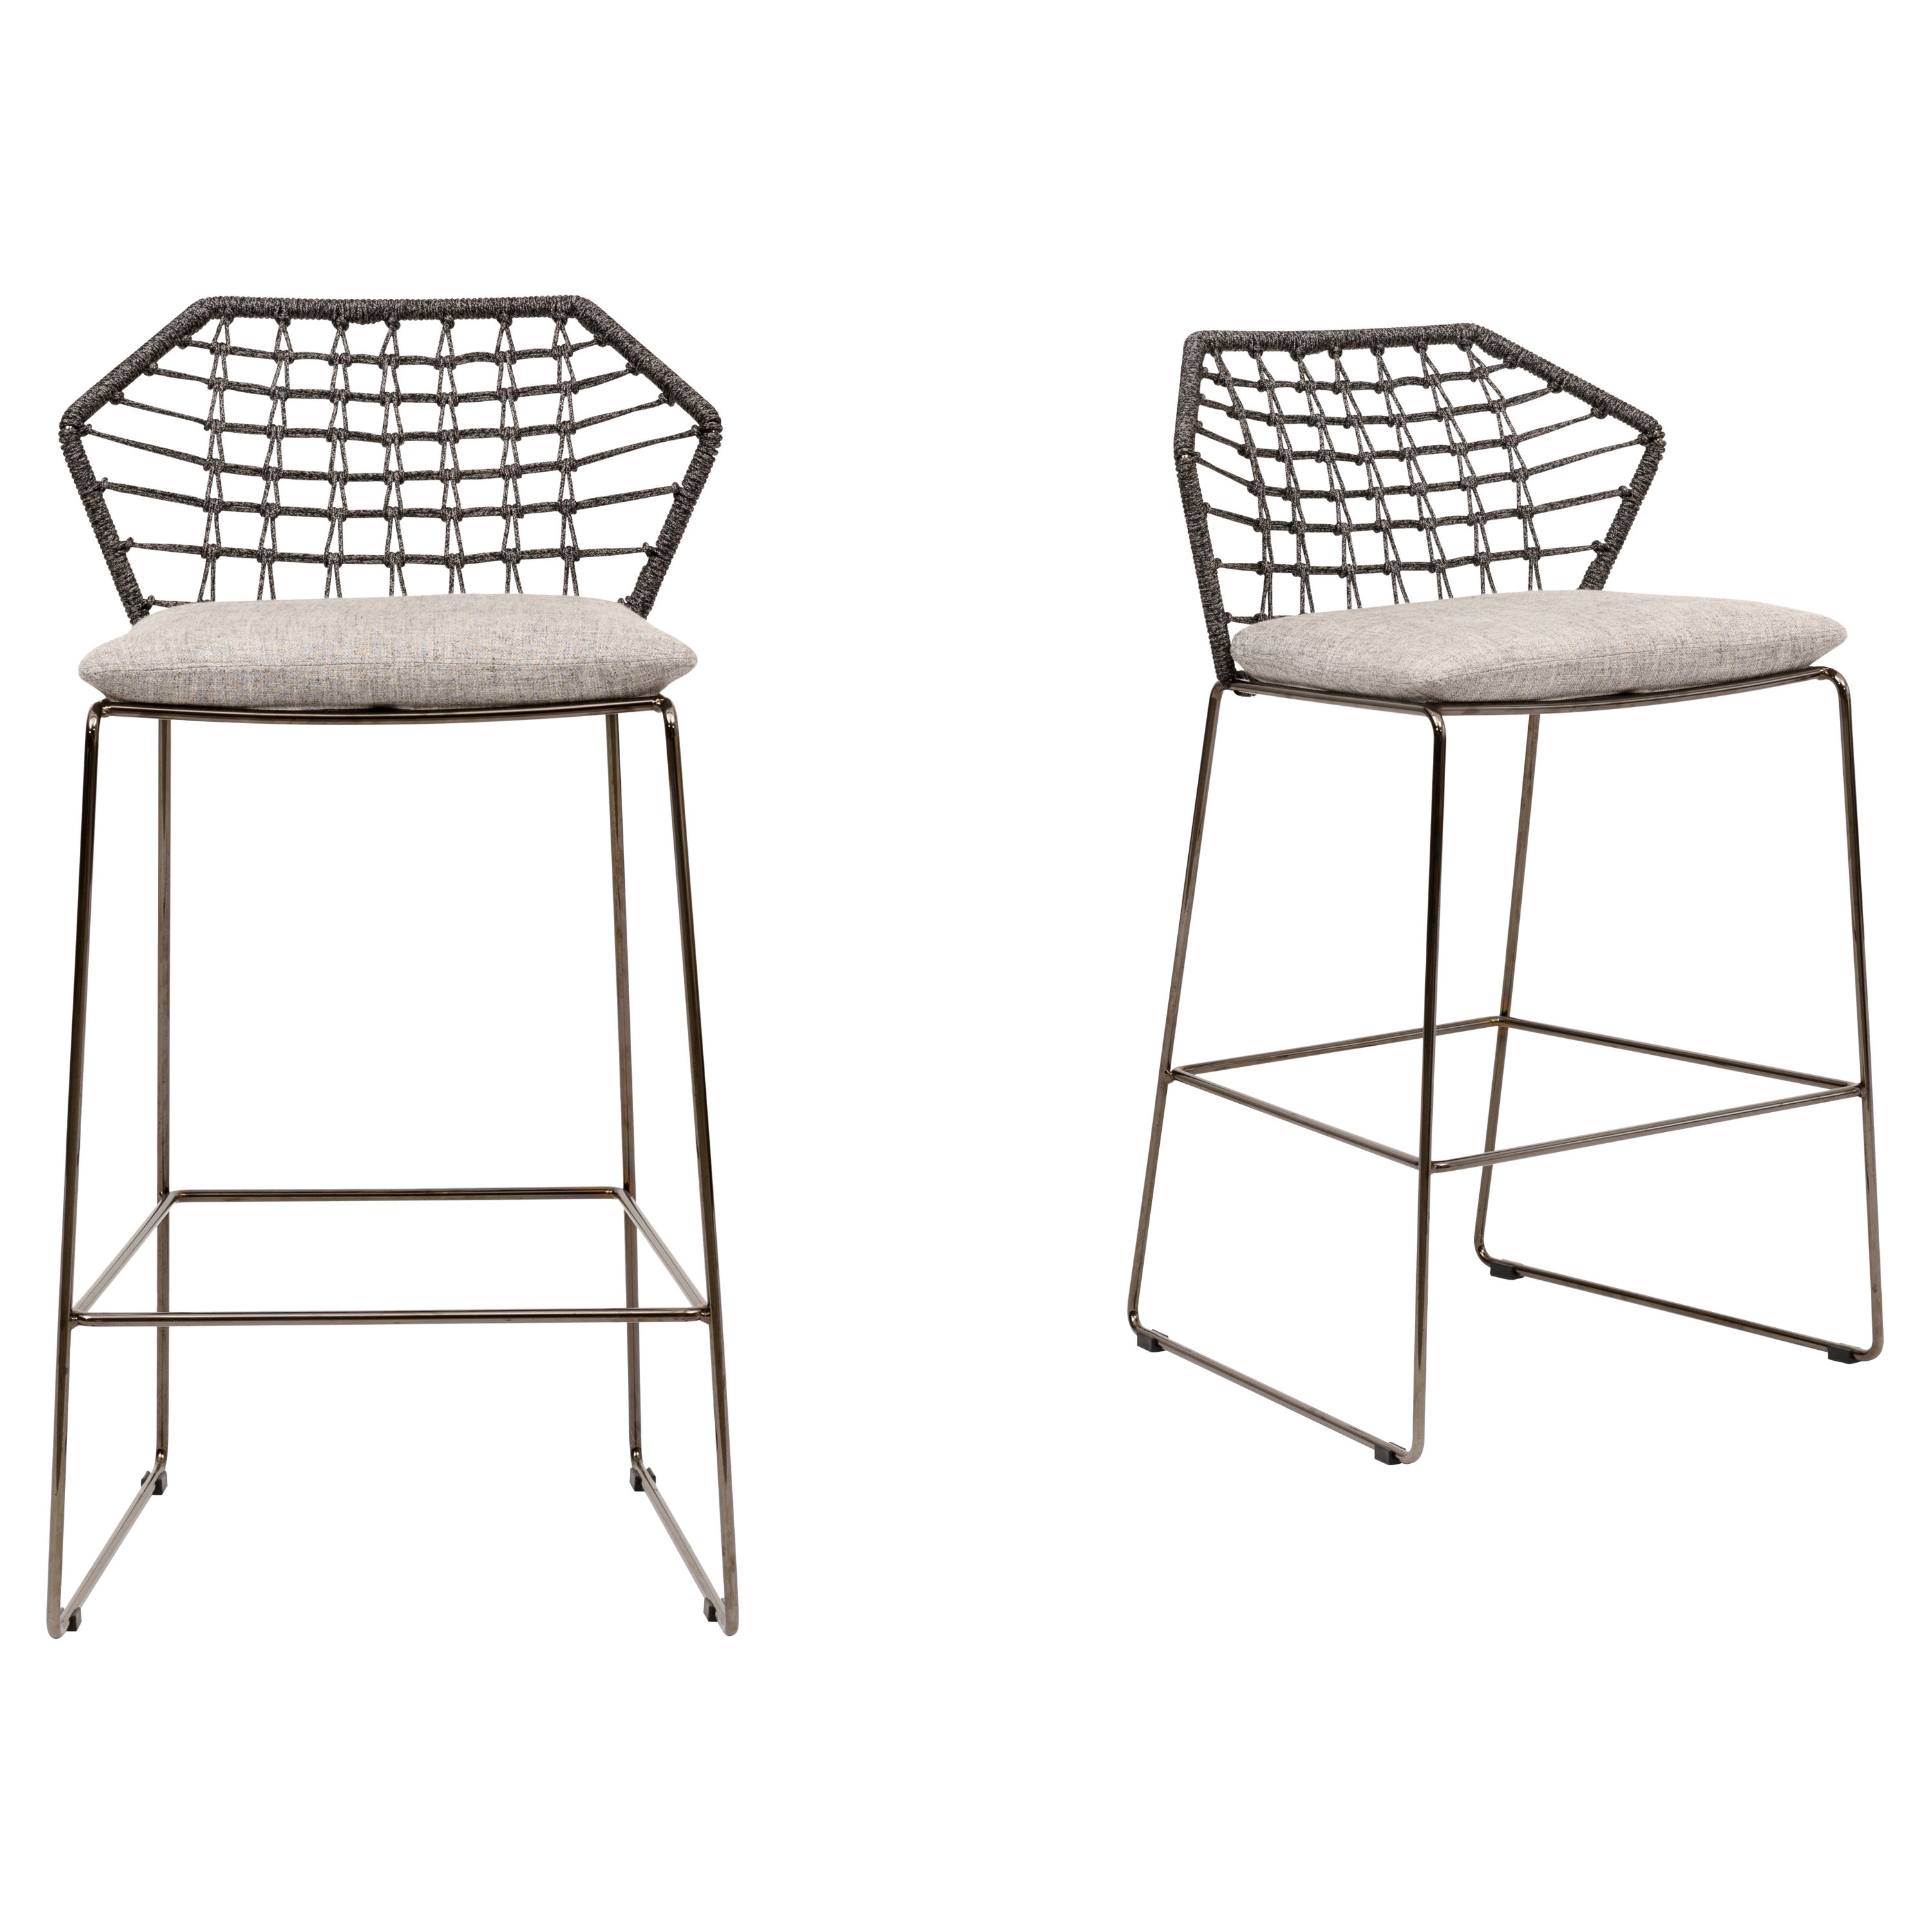 New York Soleil Low Stool with Grey Rope Frame & Black Legs by Sergio Bicego For Sale